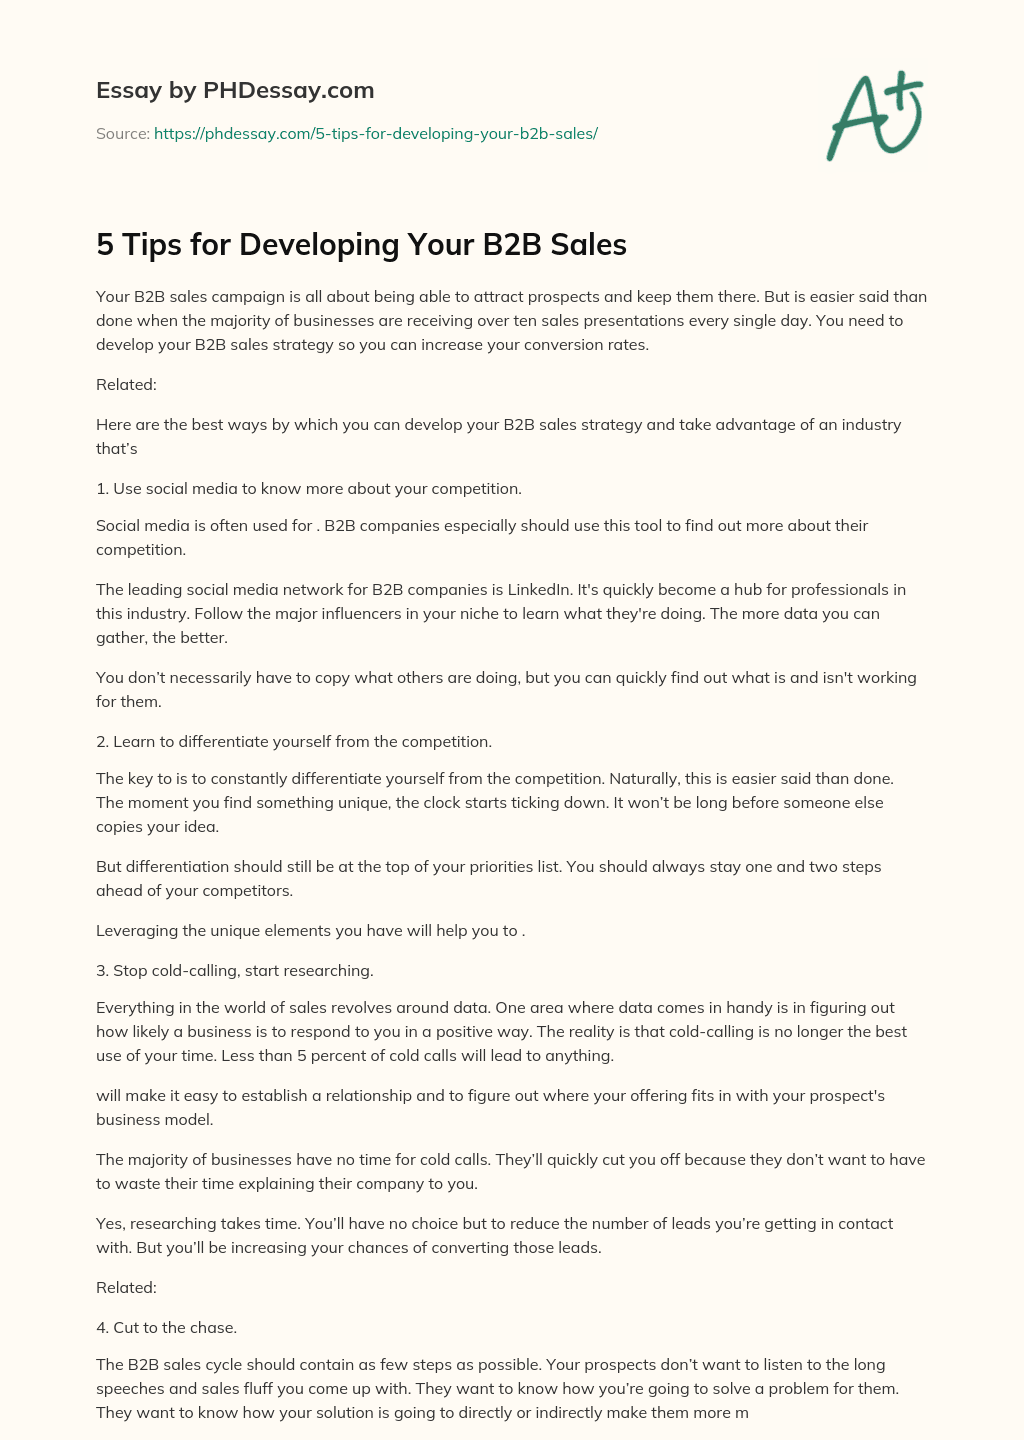 5 Tips for Developing Your B2B Sales essay